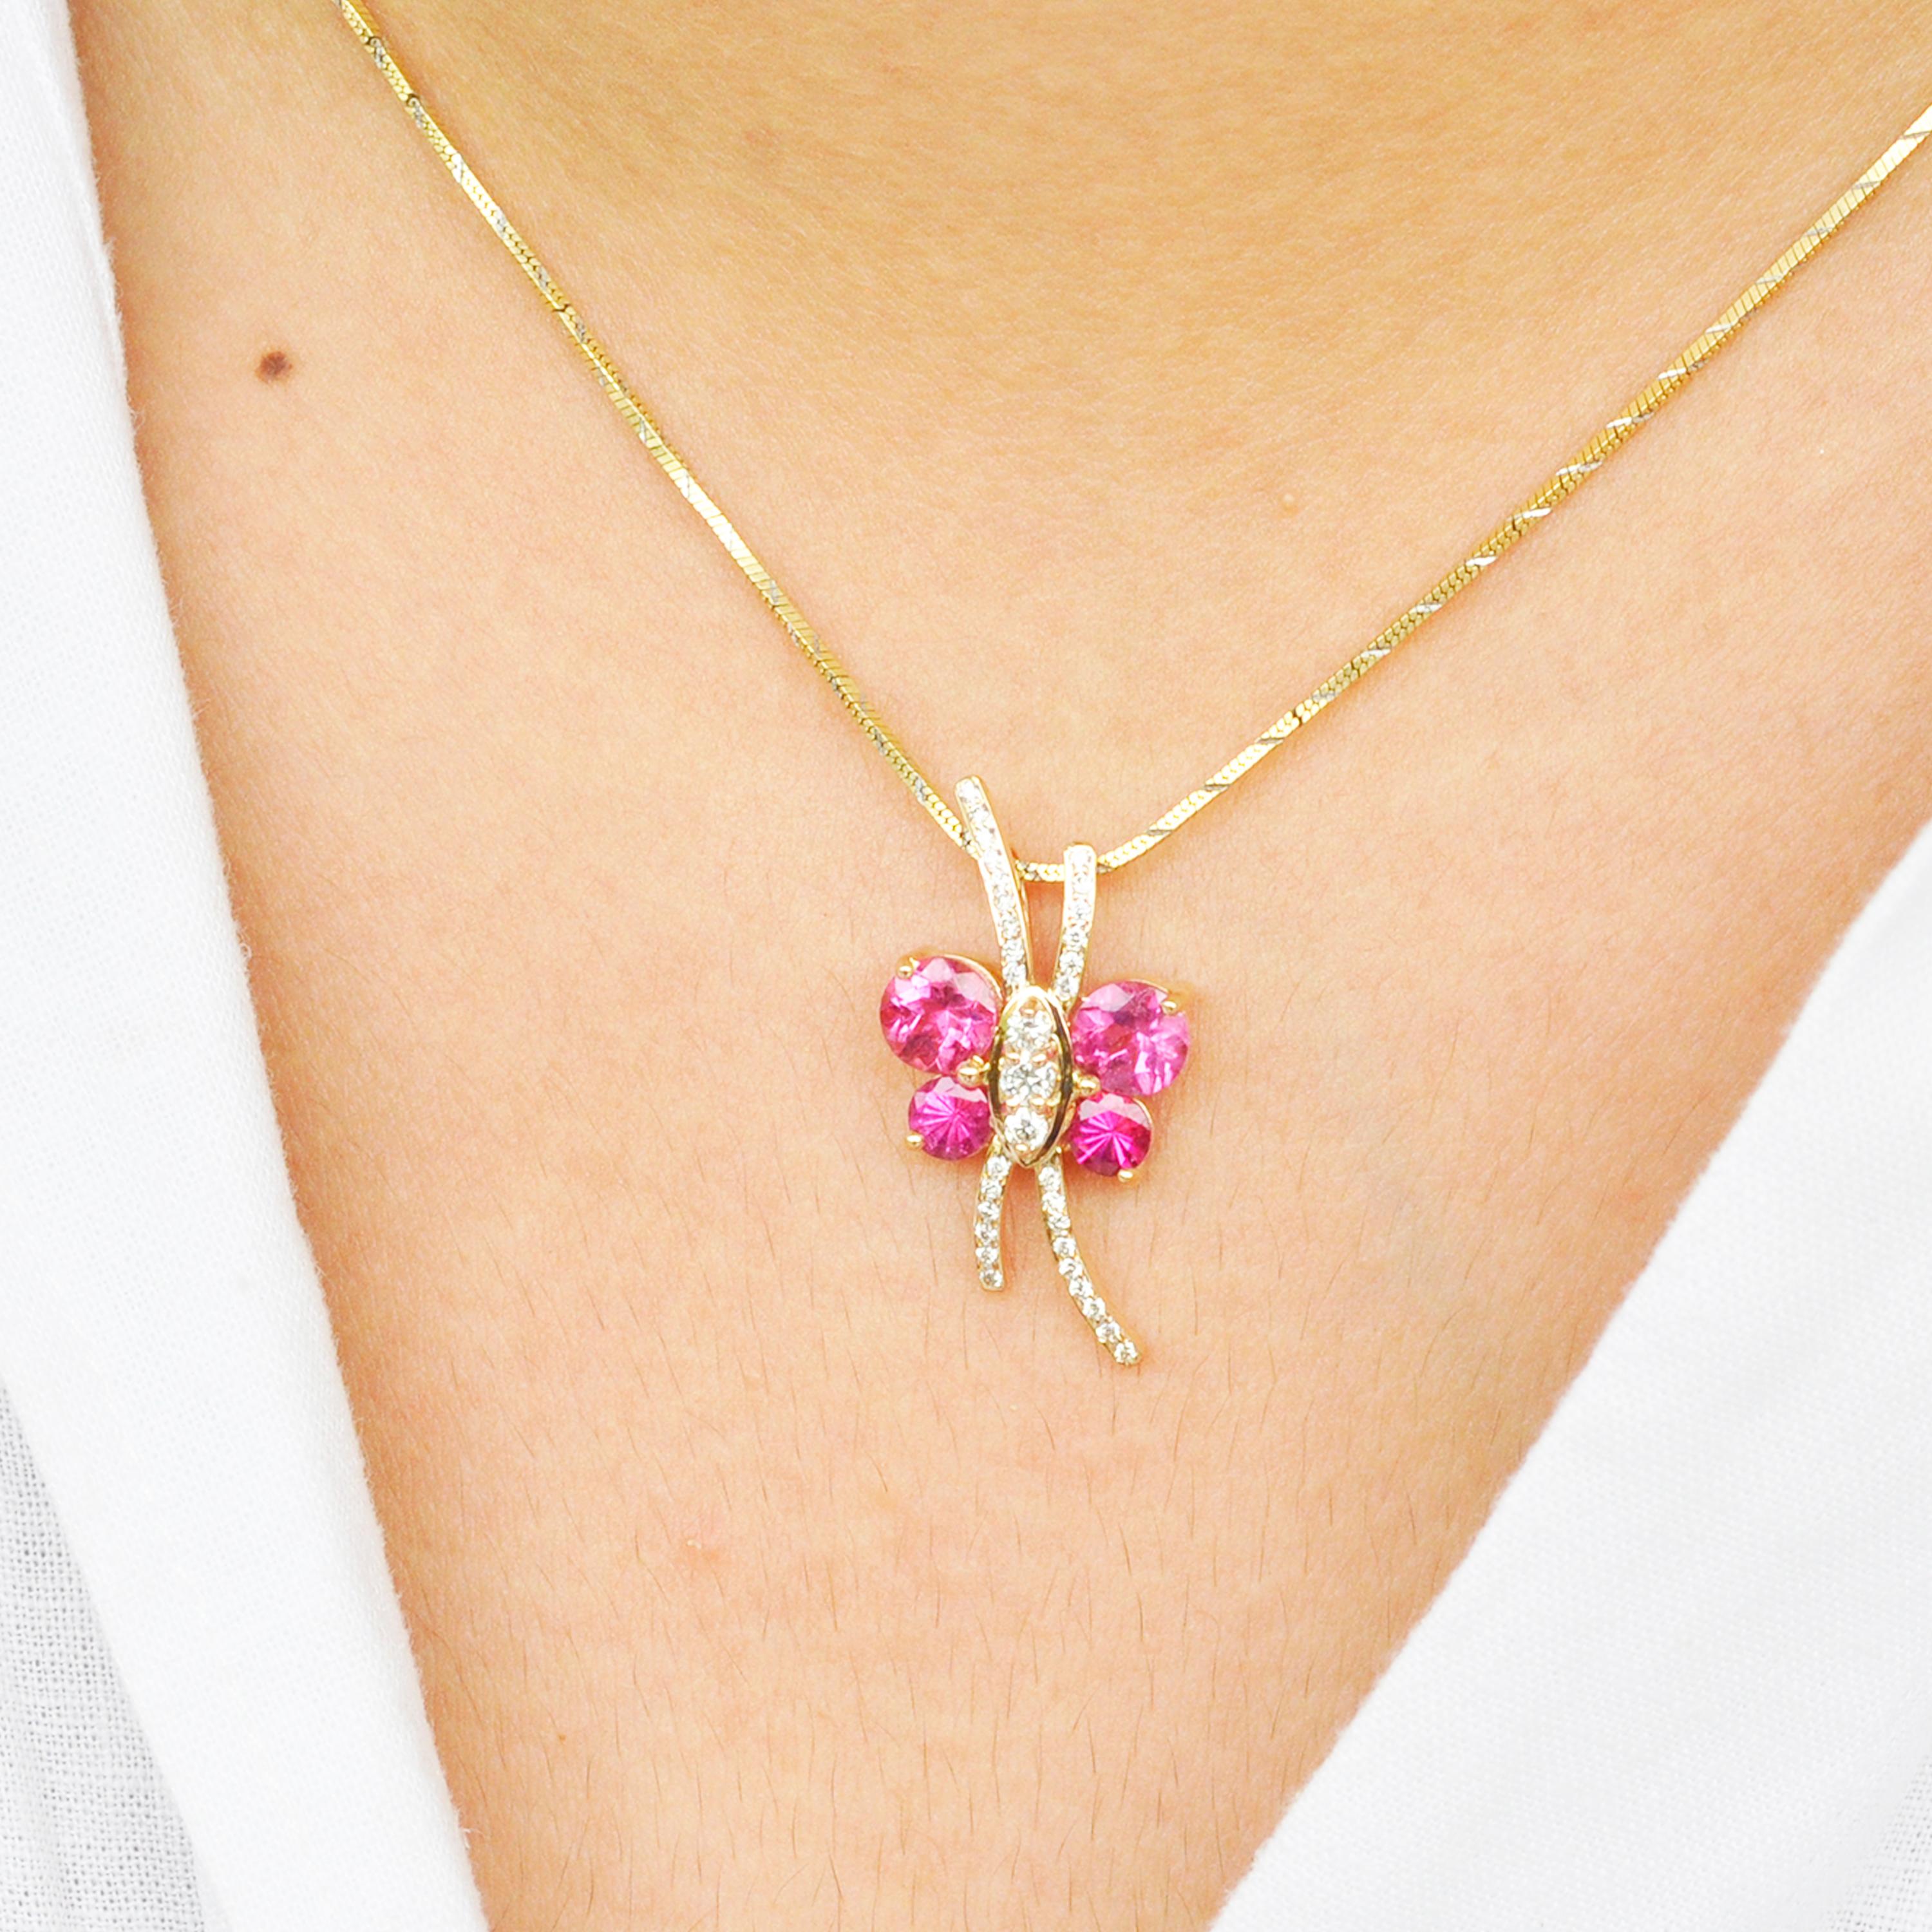  18 karat gold butterfly shaped pink tourmaline diamond pendant necklace.

A chic butterfly pendant necklace is set in 18 karat gold using fine quality alloys. Diamonds are used in the centre to form the body and antenna of the butterfly. The wings